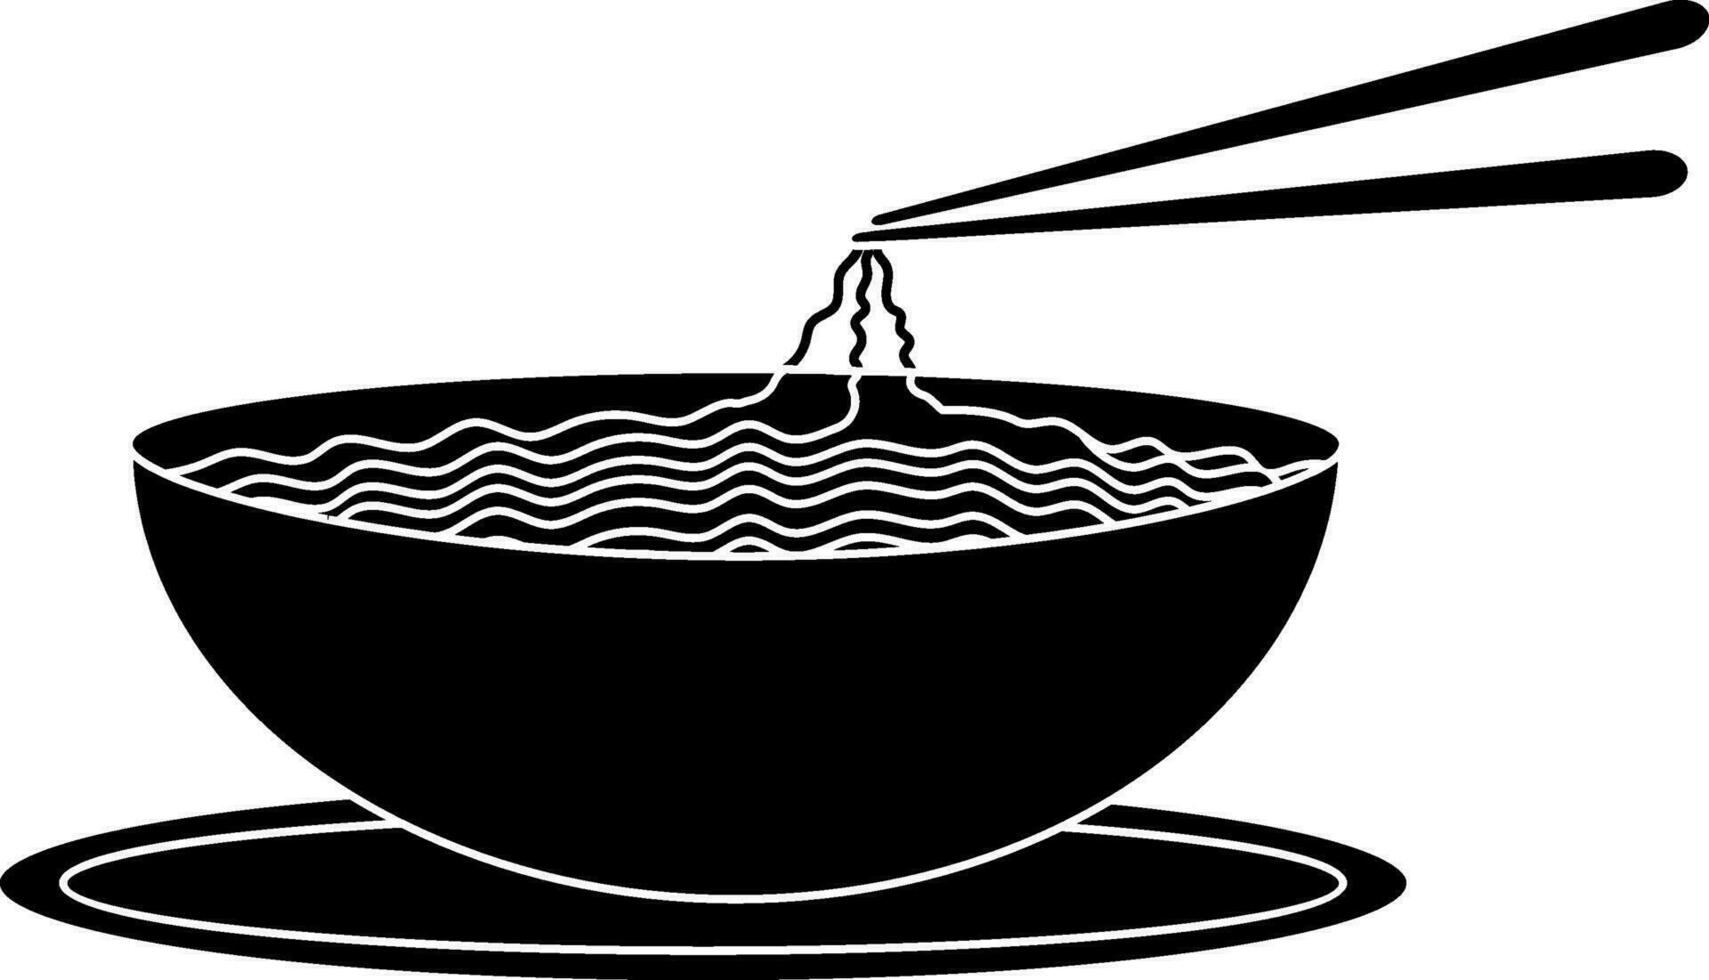 Noodle in bowl on plate with chopsticks. vector